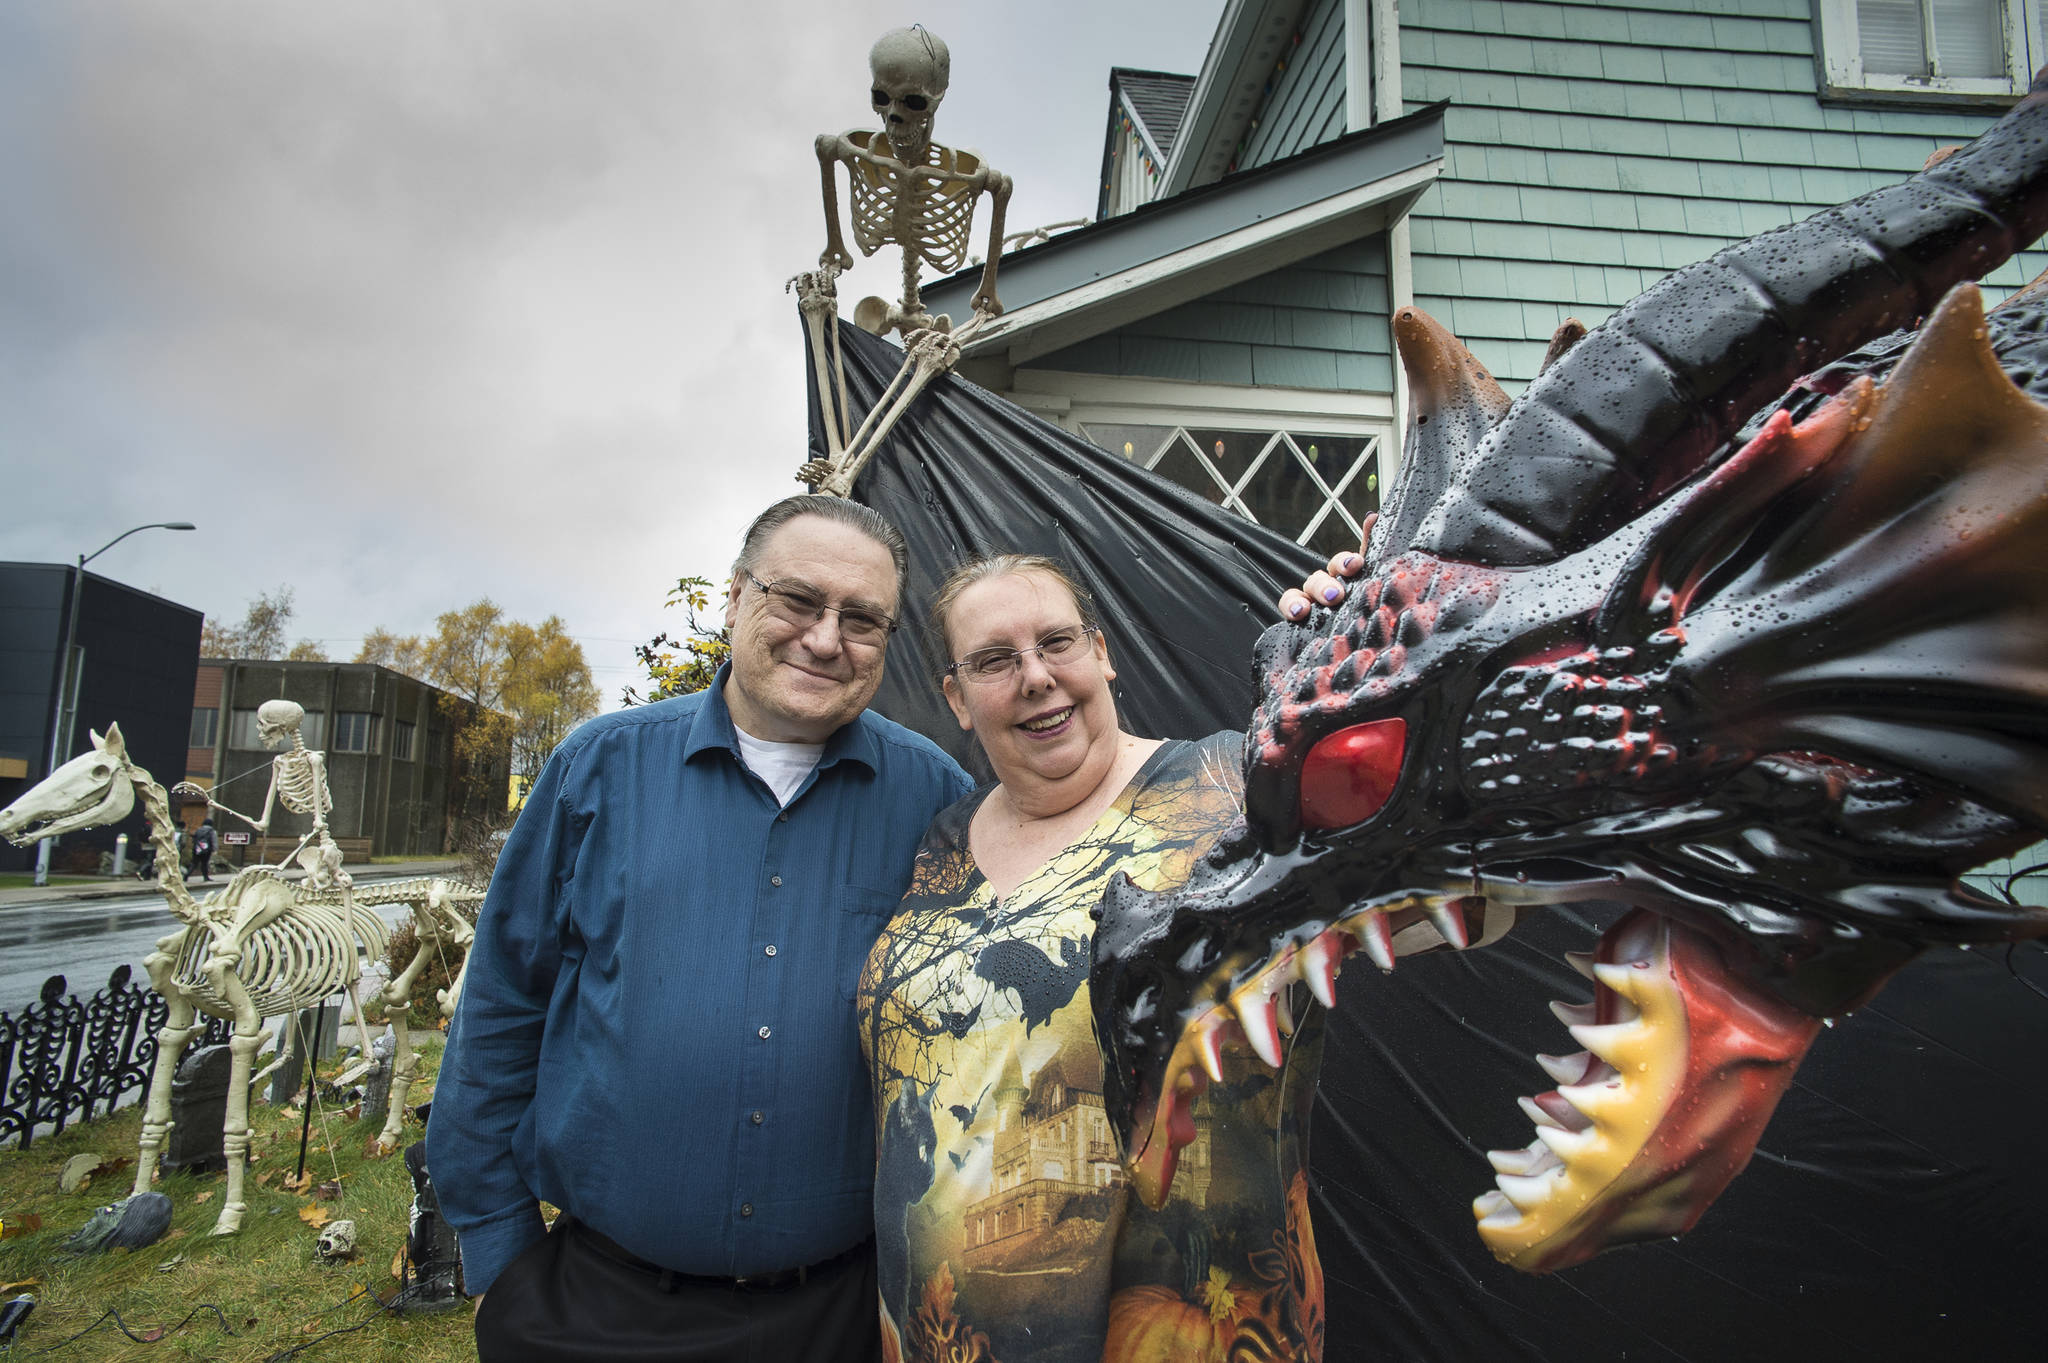 Will and Mindy Jones pose with some of their many Halloween decorations at their home at the corner of 10th Street and Glacier Avenue on Tuesday, Oct. 30, 2018. The Jones have been decorating their home for the last 14 years and expect to nearly 400 visitors this year. Mindy said, “If you don’t like spiders, this isn’t the place for you.” (Michael Penn | Juneau Empire)